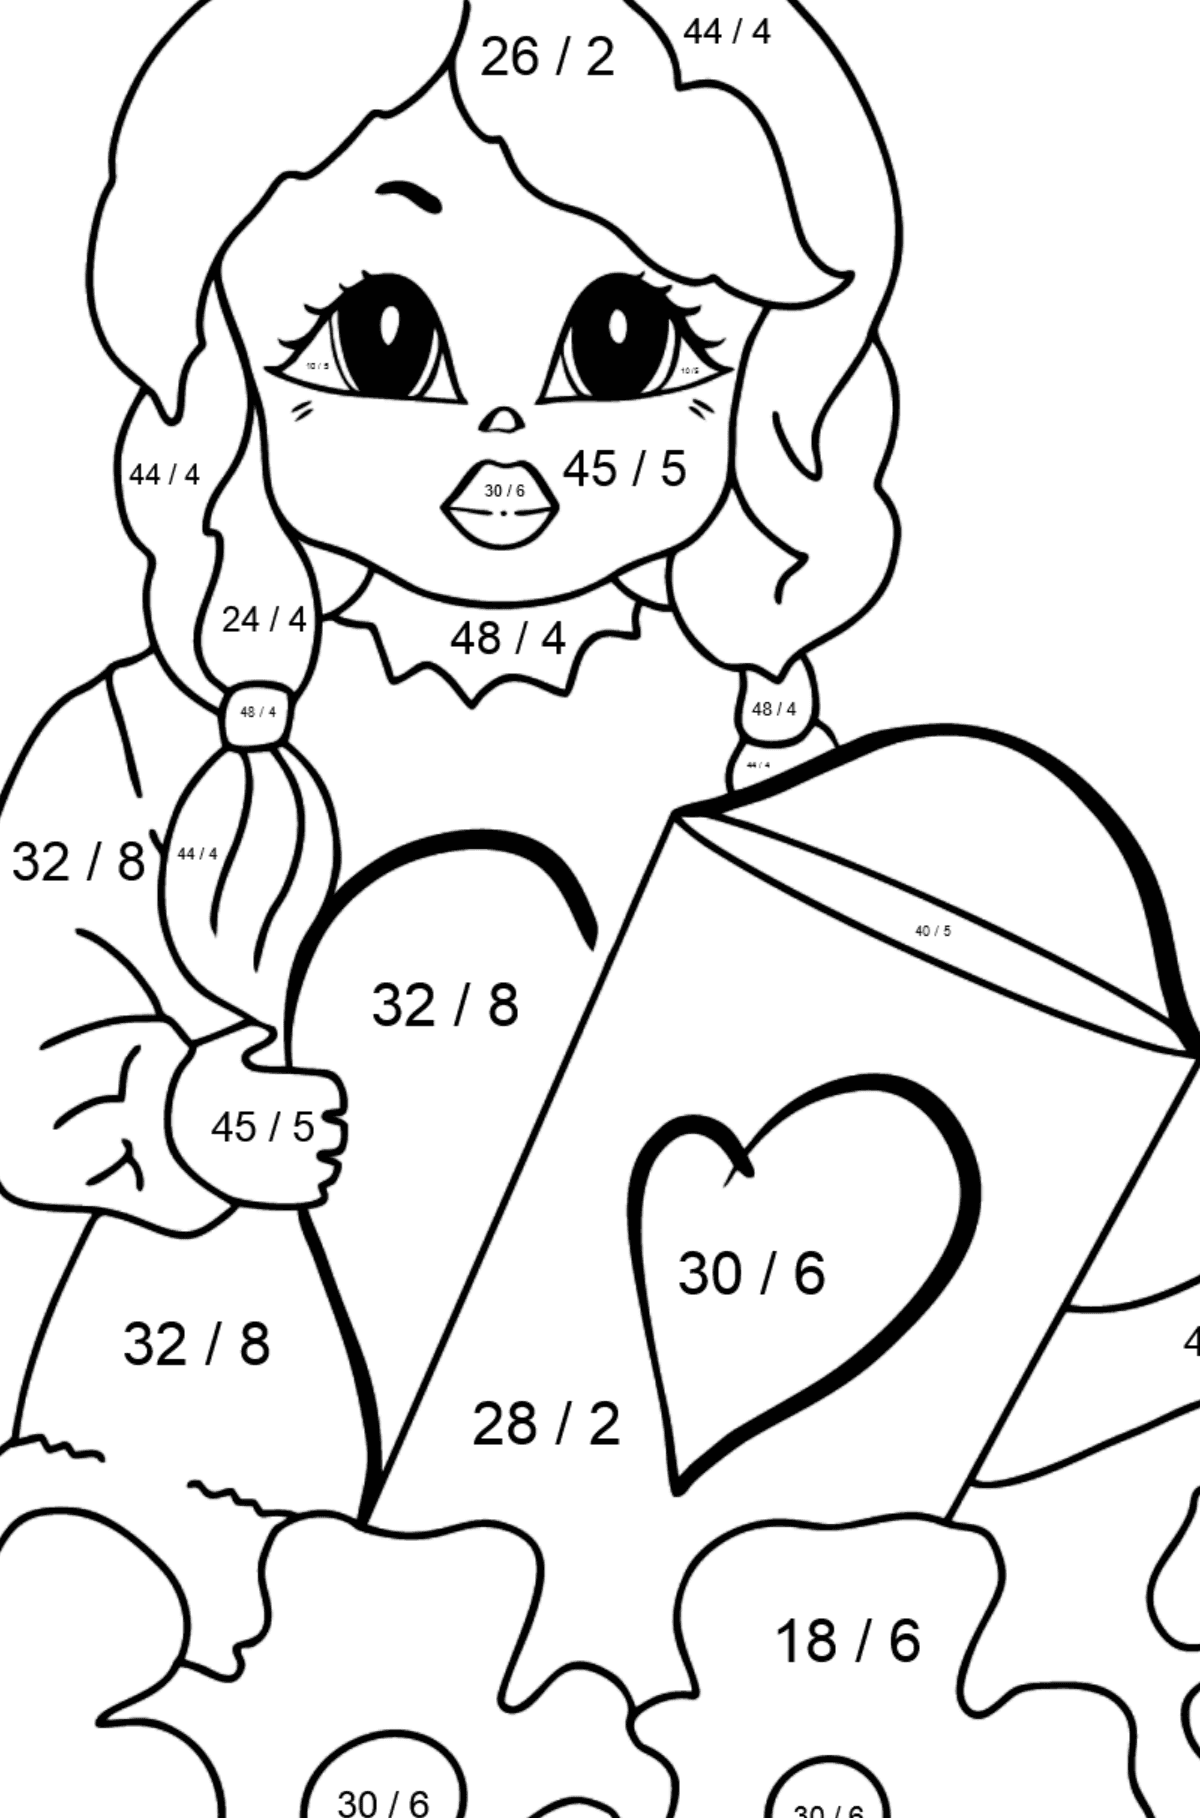 Coloring Page - A Princess with a Watering Can - Math Coloring - Division for Kids